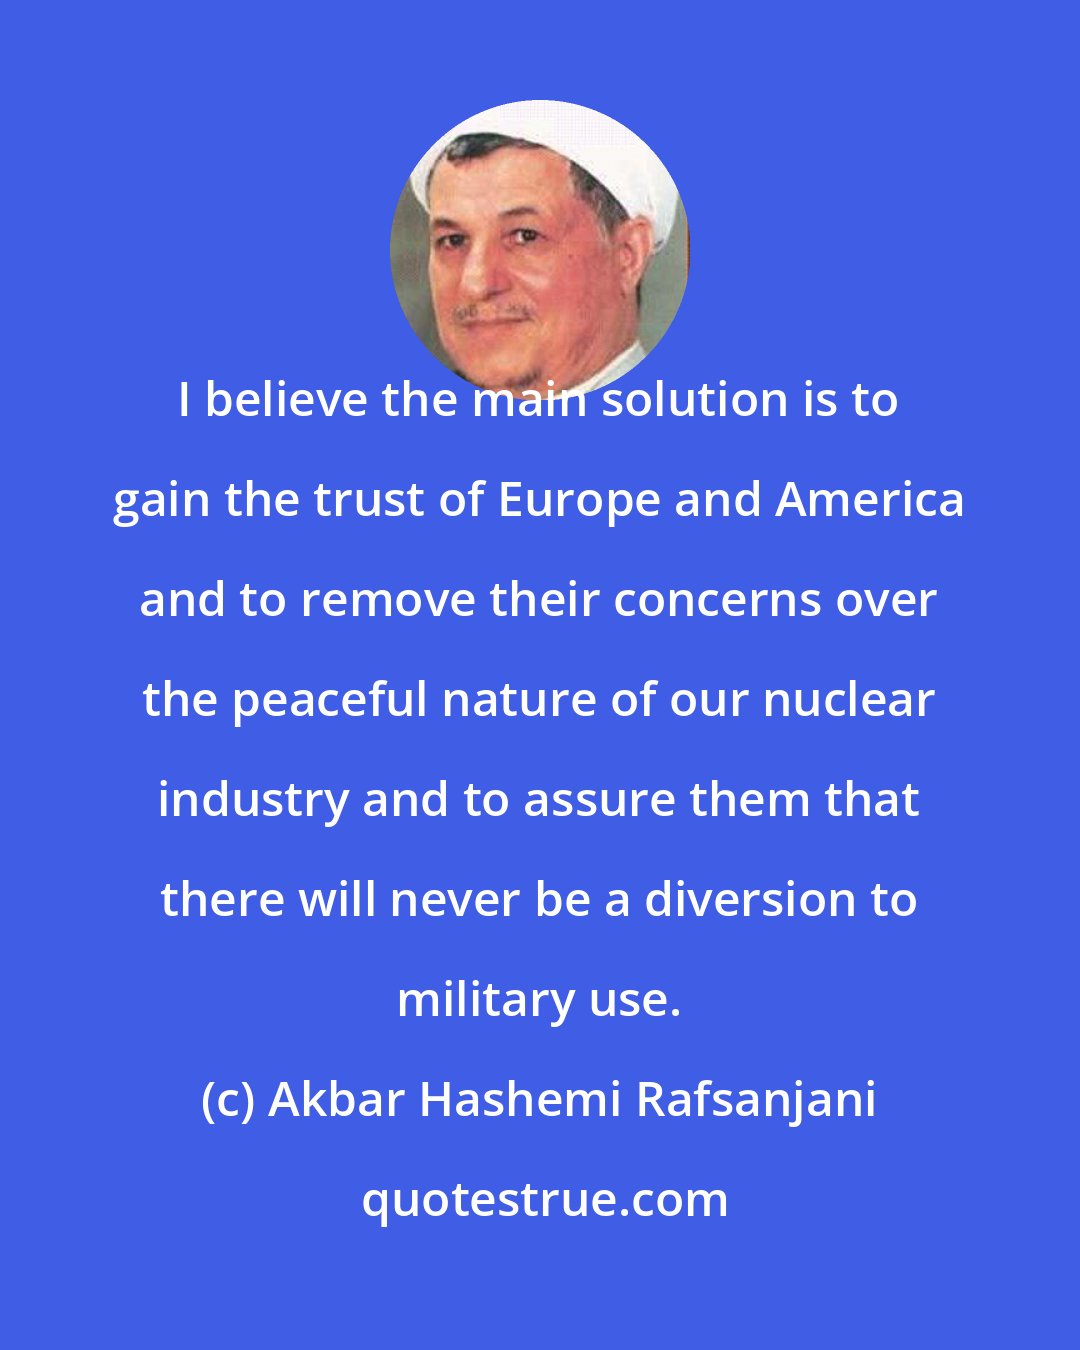 Akbar Hashemi Rafsanjani: I believe the main solution is to gain the trust of Europe and America and to remove their concerns over the peaceful nature of our nuclear industry and to assure them that there will never be a diversion to military use.